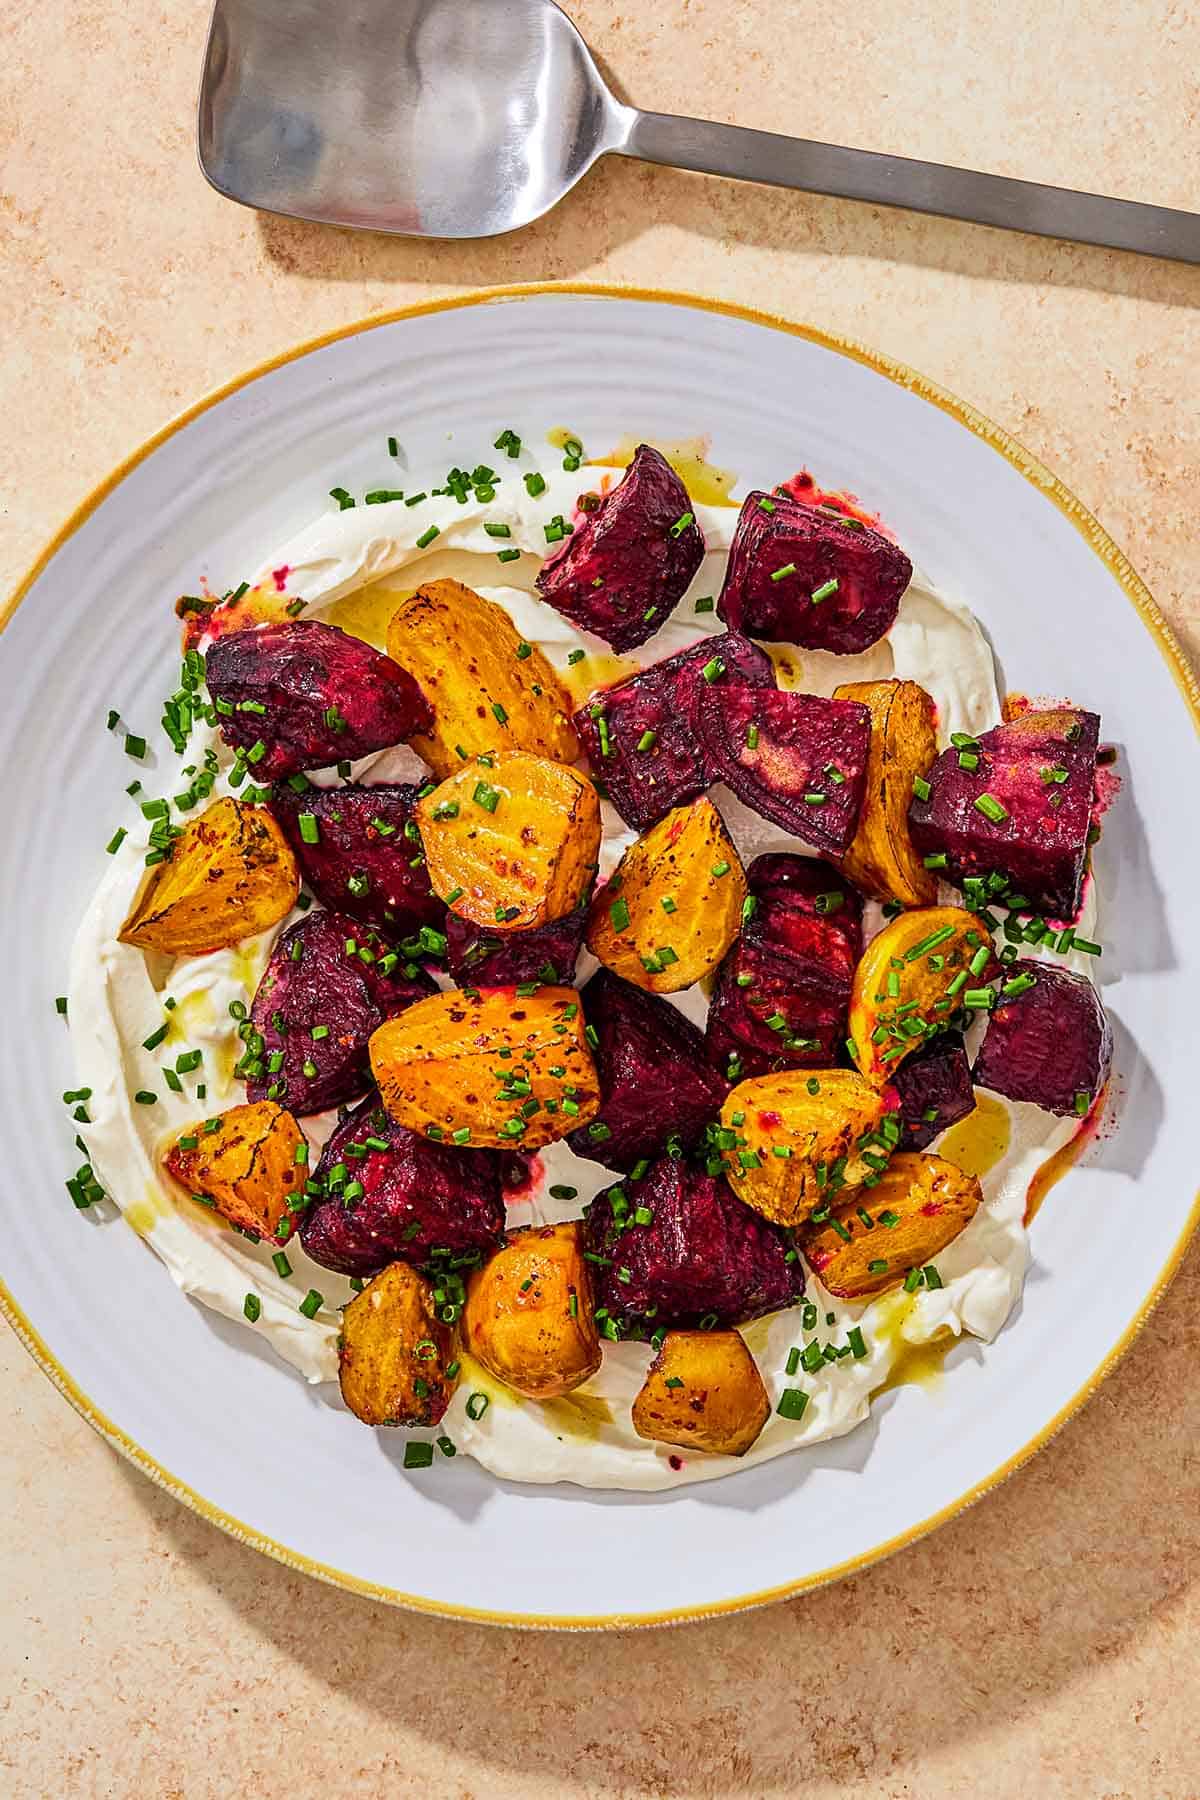 Roasted beets on a layer of labneh spread on a plate and topped with chives and a drizzle of apple cider vinaigrette next to a serving spoon.